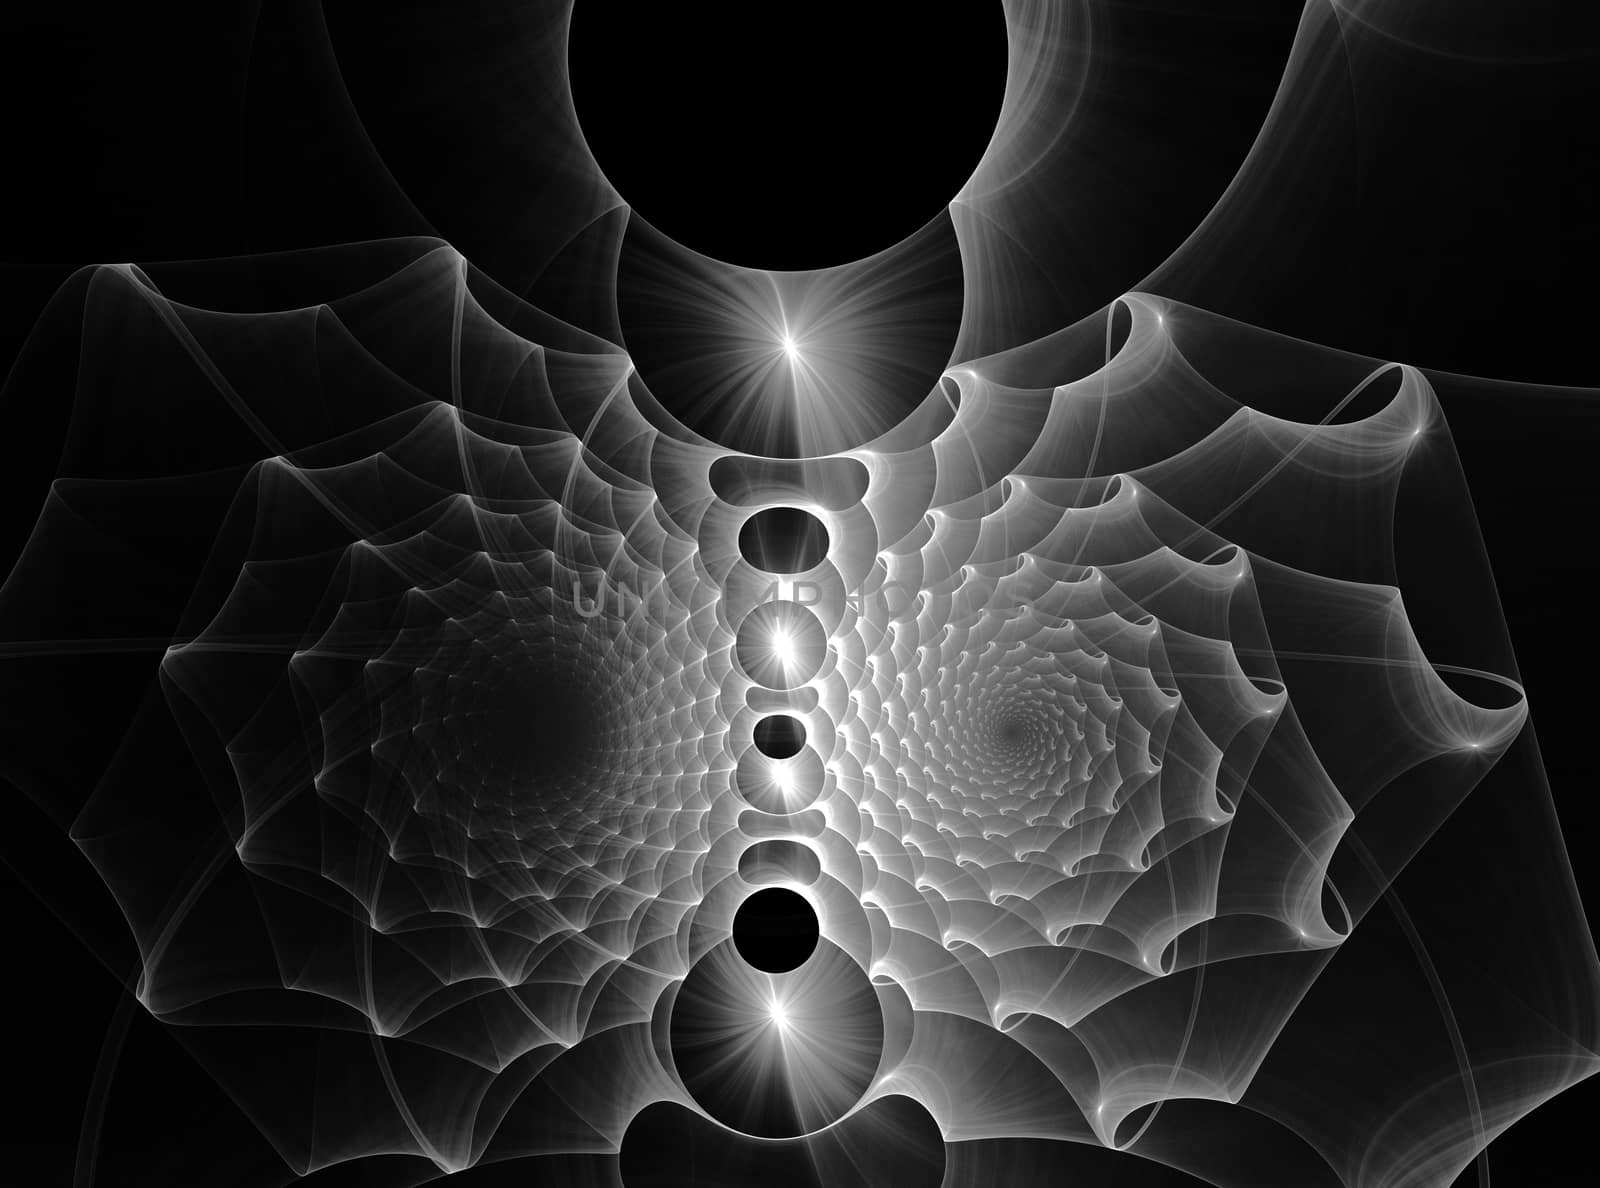 abstract fractal pattern on black background by Chechotkin